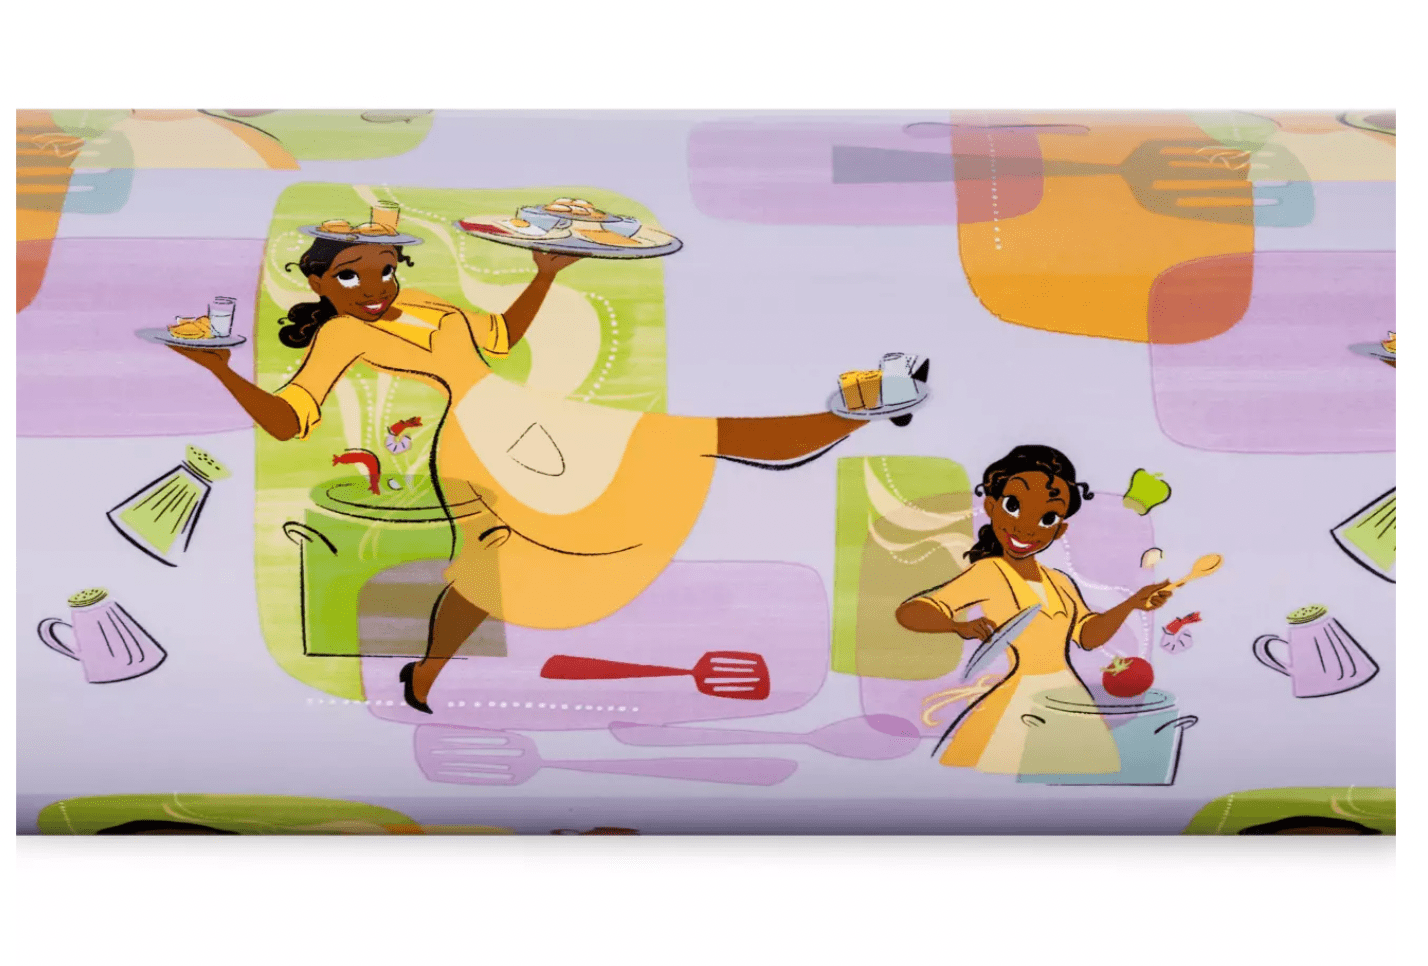 Disney Parks on X: Find Tiana-inspired cookware and collections